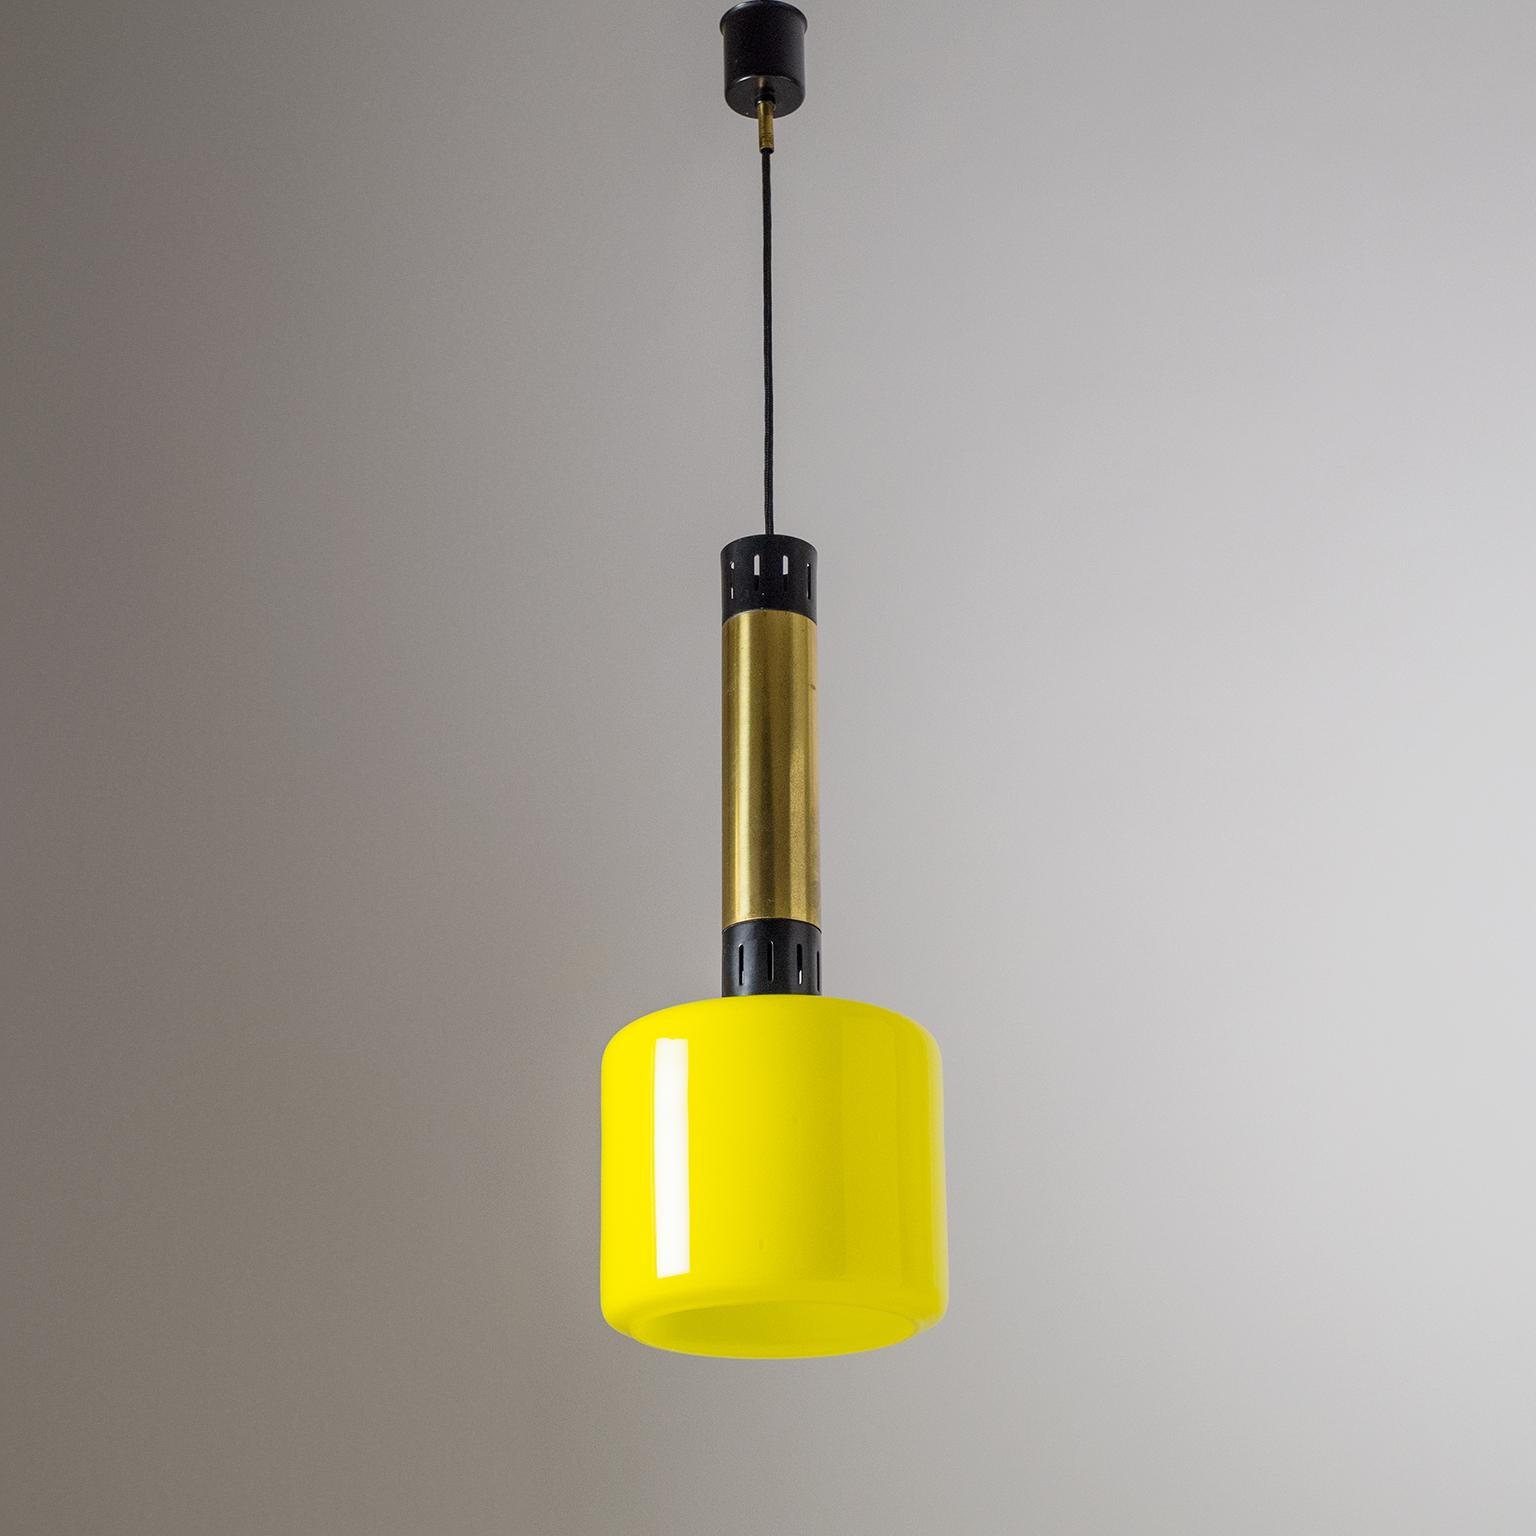 Classic Stilnovo pendant with yellow glass diffuser from the 1950s. The hardware is tubular brass with perforated black lacquered aluminum details. Fine original condition with some patina on the brass. One original brass and ceramic E27 socket with